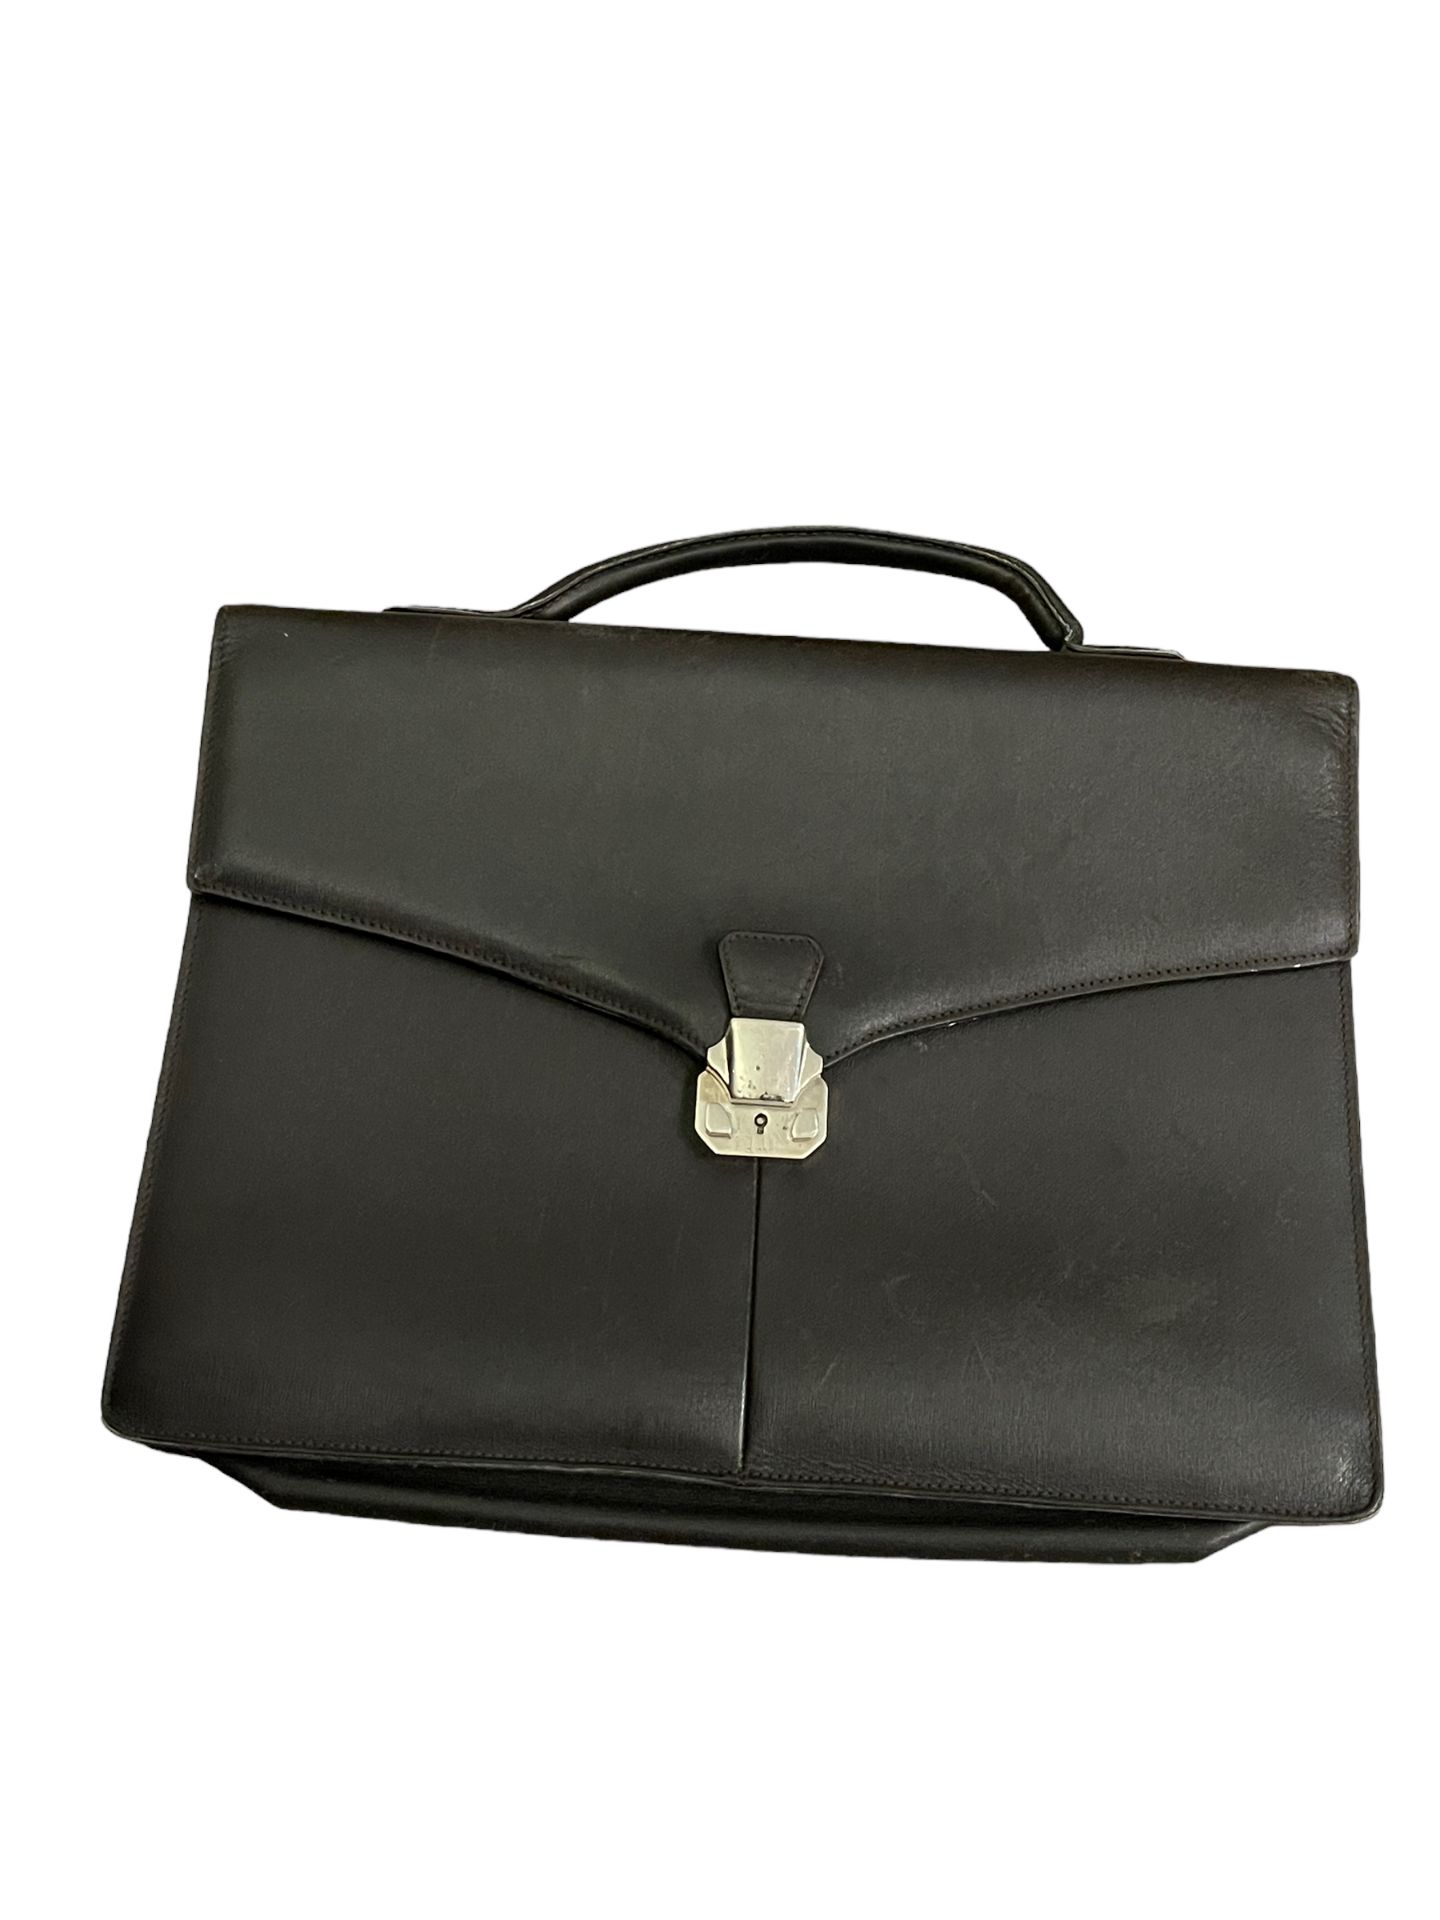 Dunhill Leather lost baggage from private. jet charter - Image 2 of 9